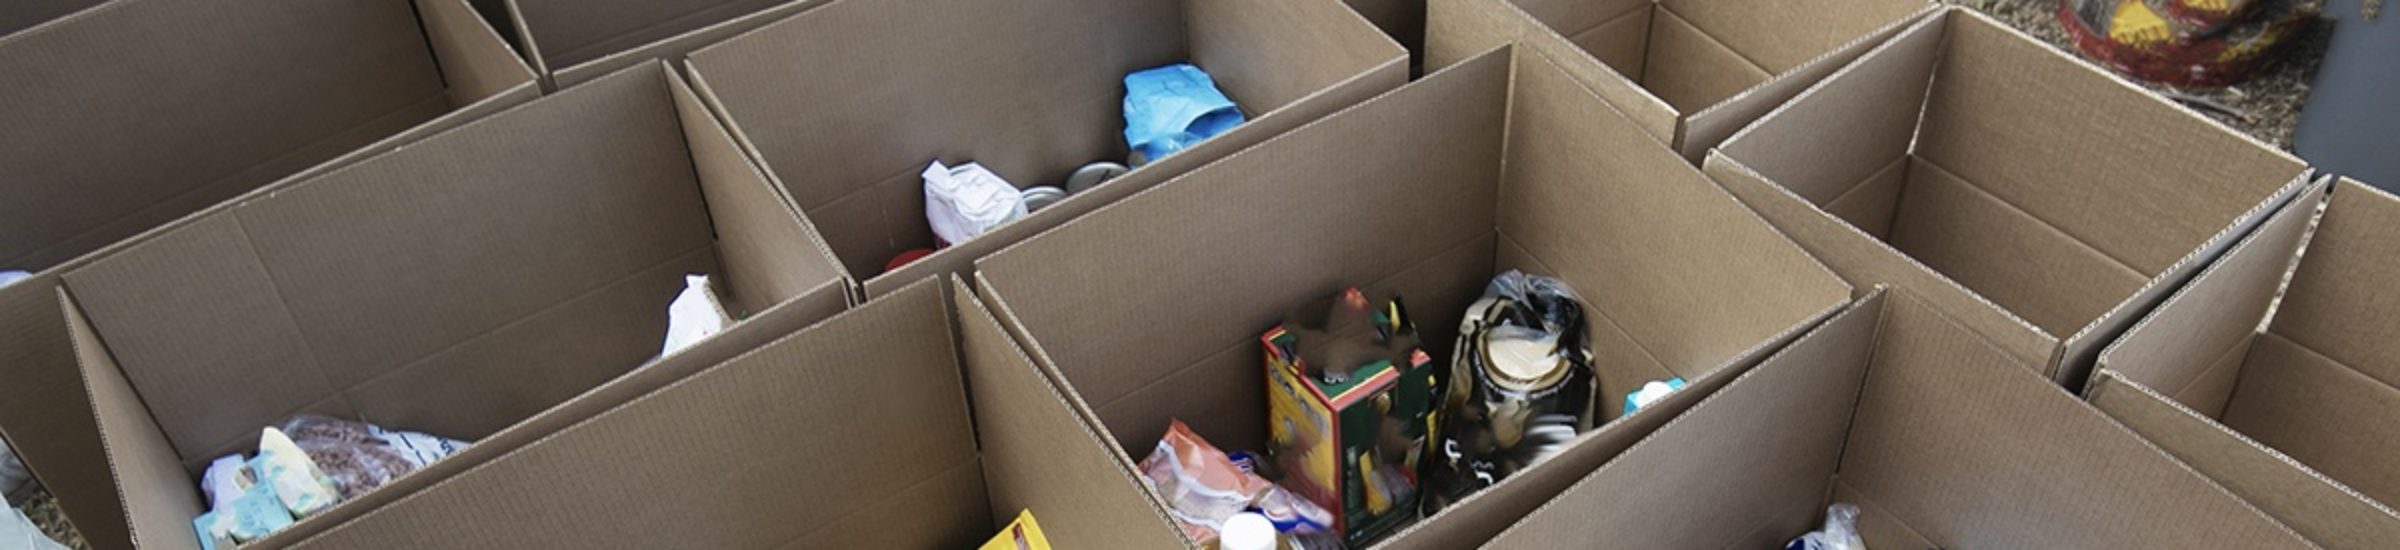 a photo of cardboard boxes filled with food donations